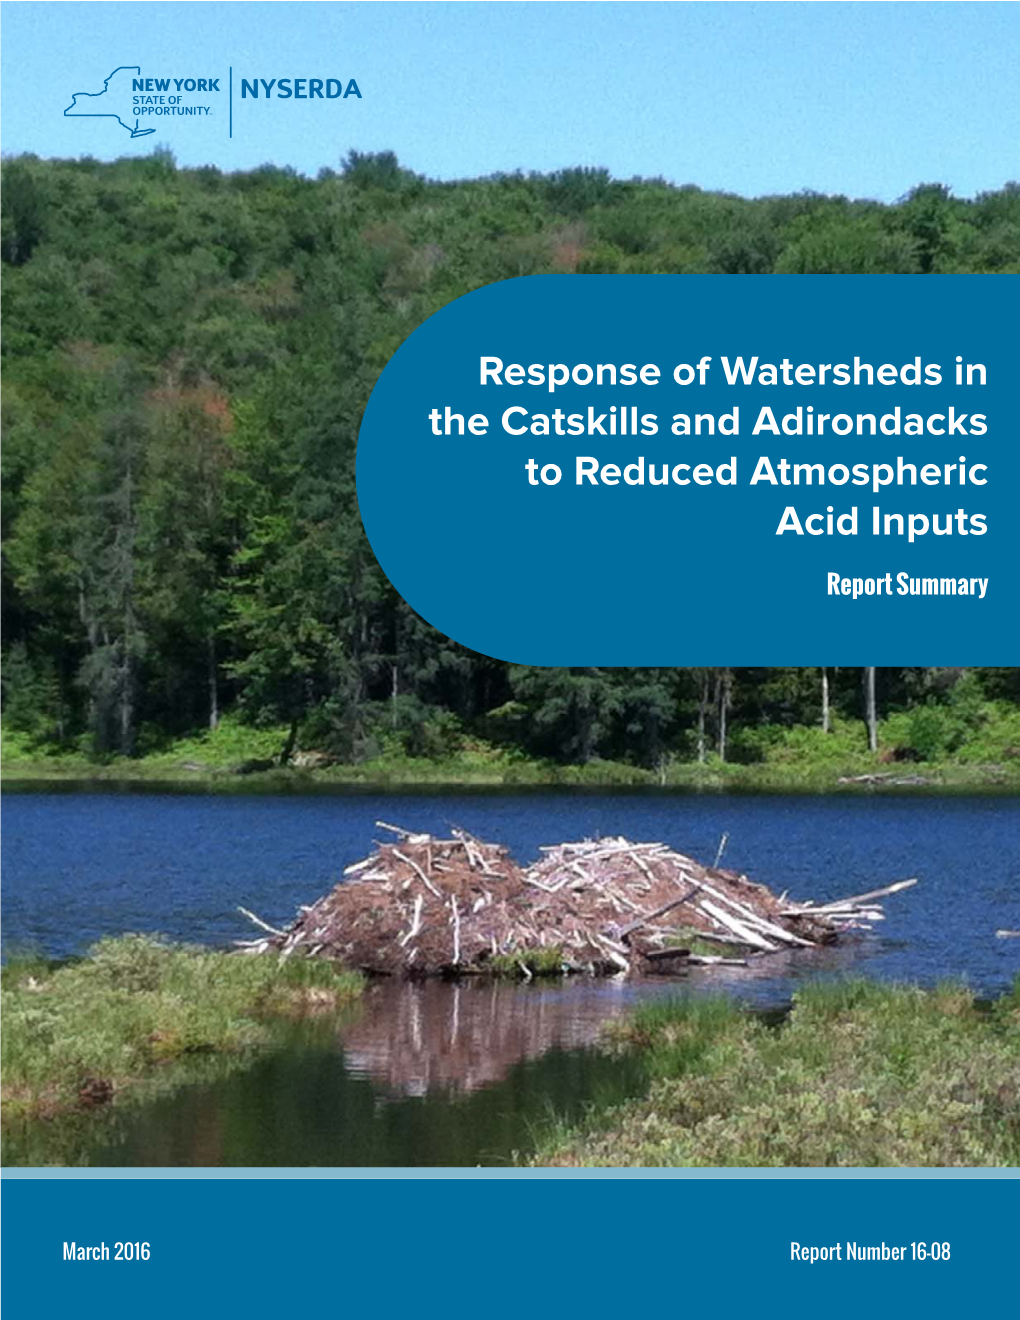 Response of Watersheds in the Catskills and Adirondacks to Reduced Atmospheric Acid Inputs